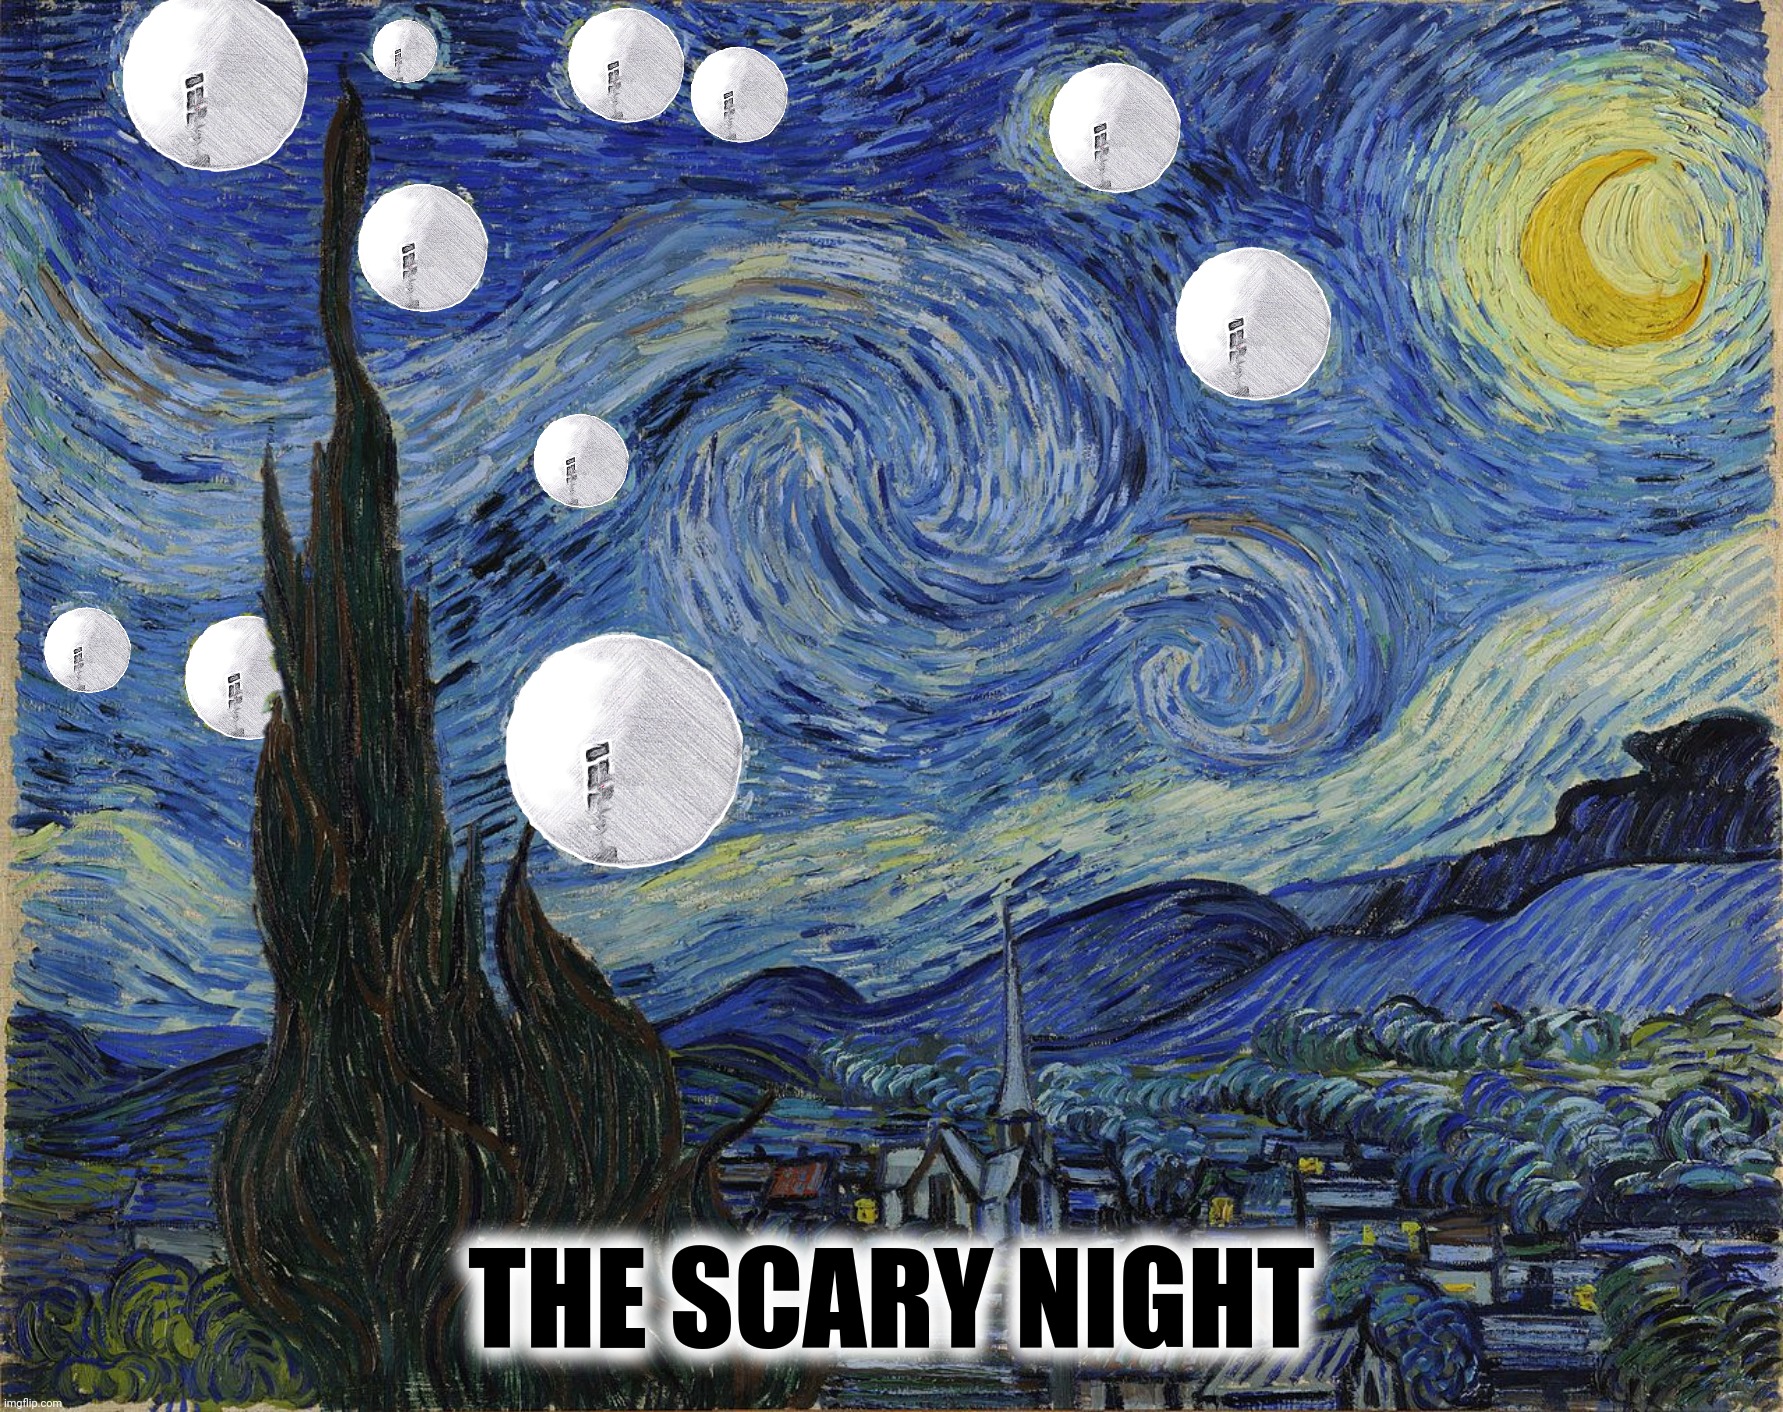 THE SCARY NIGHT | made w/ Imgflip meme maker